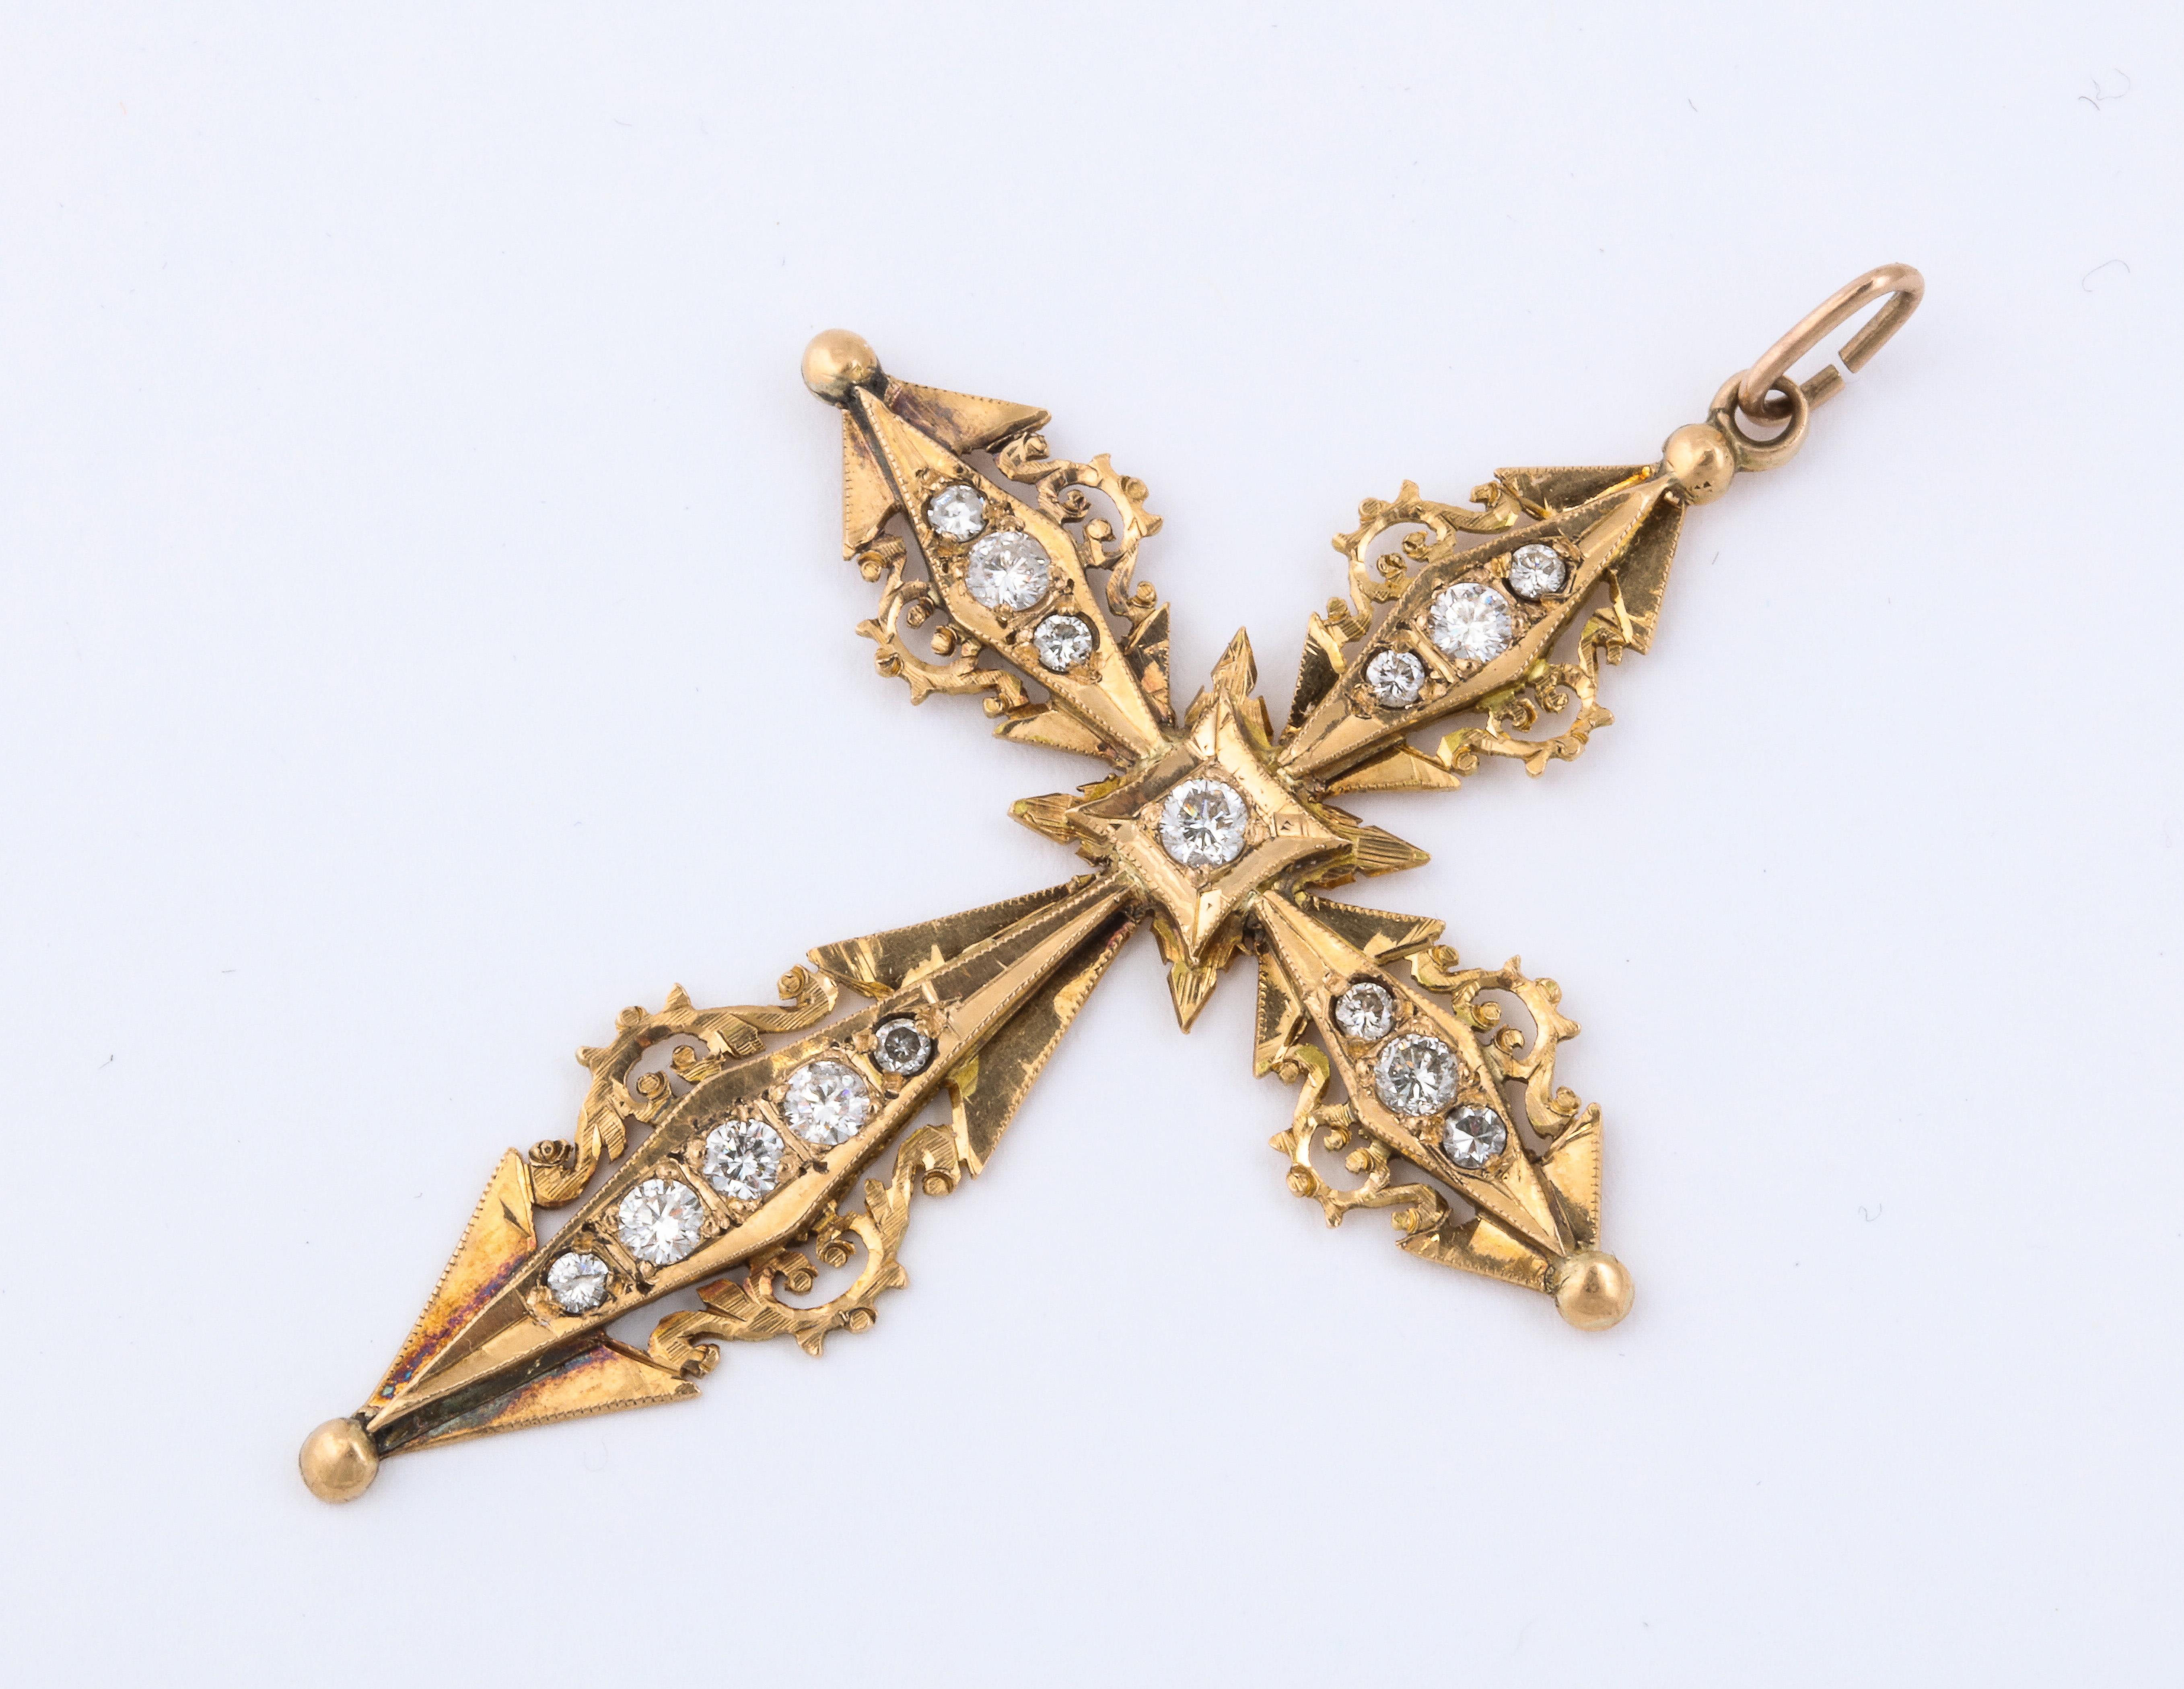 A stunning French Antique Diamond and Gold Cross. An 18 k gold cross comprised of 15 quality diamonds set on a Art Nouveau form. An exceptional piece. 